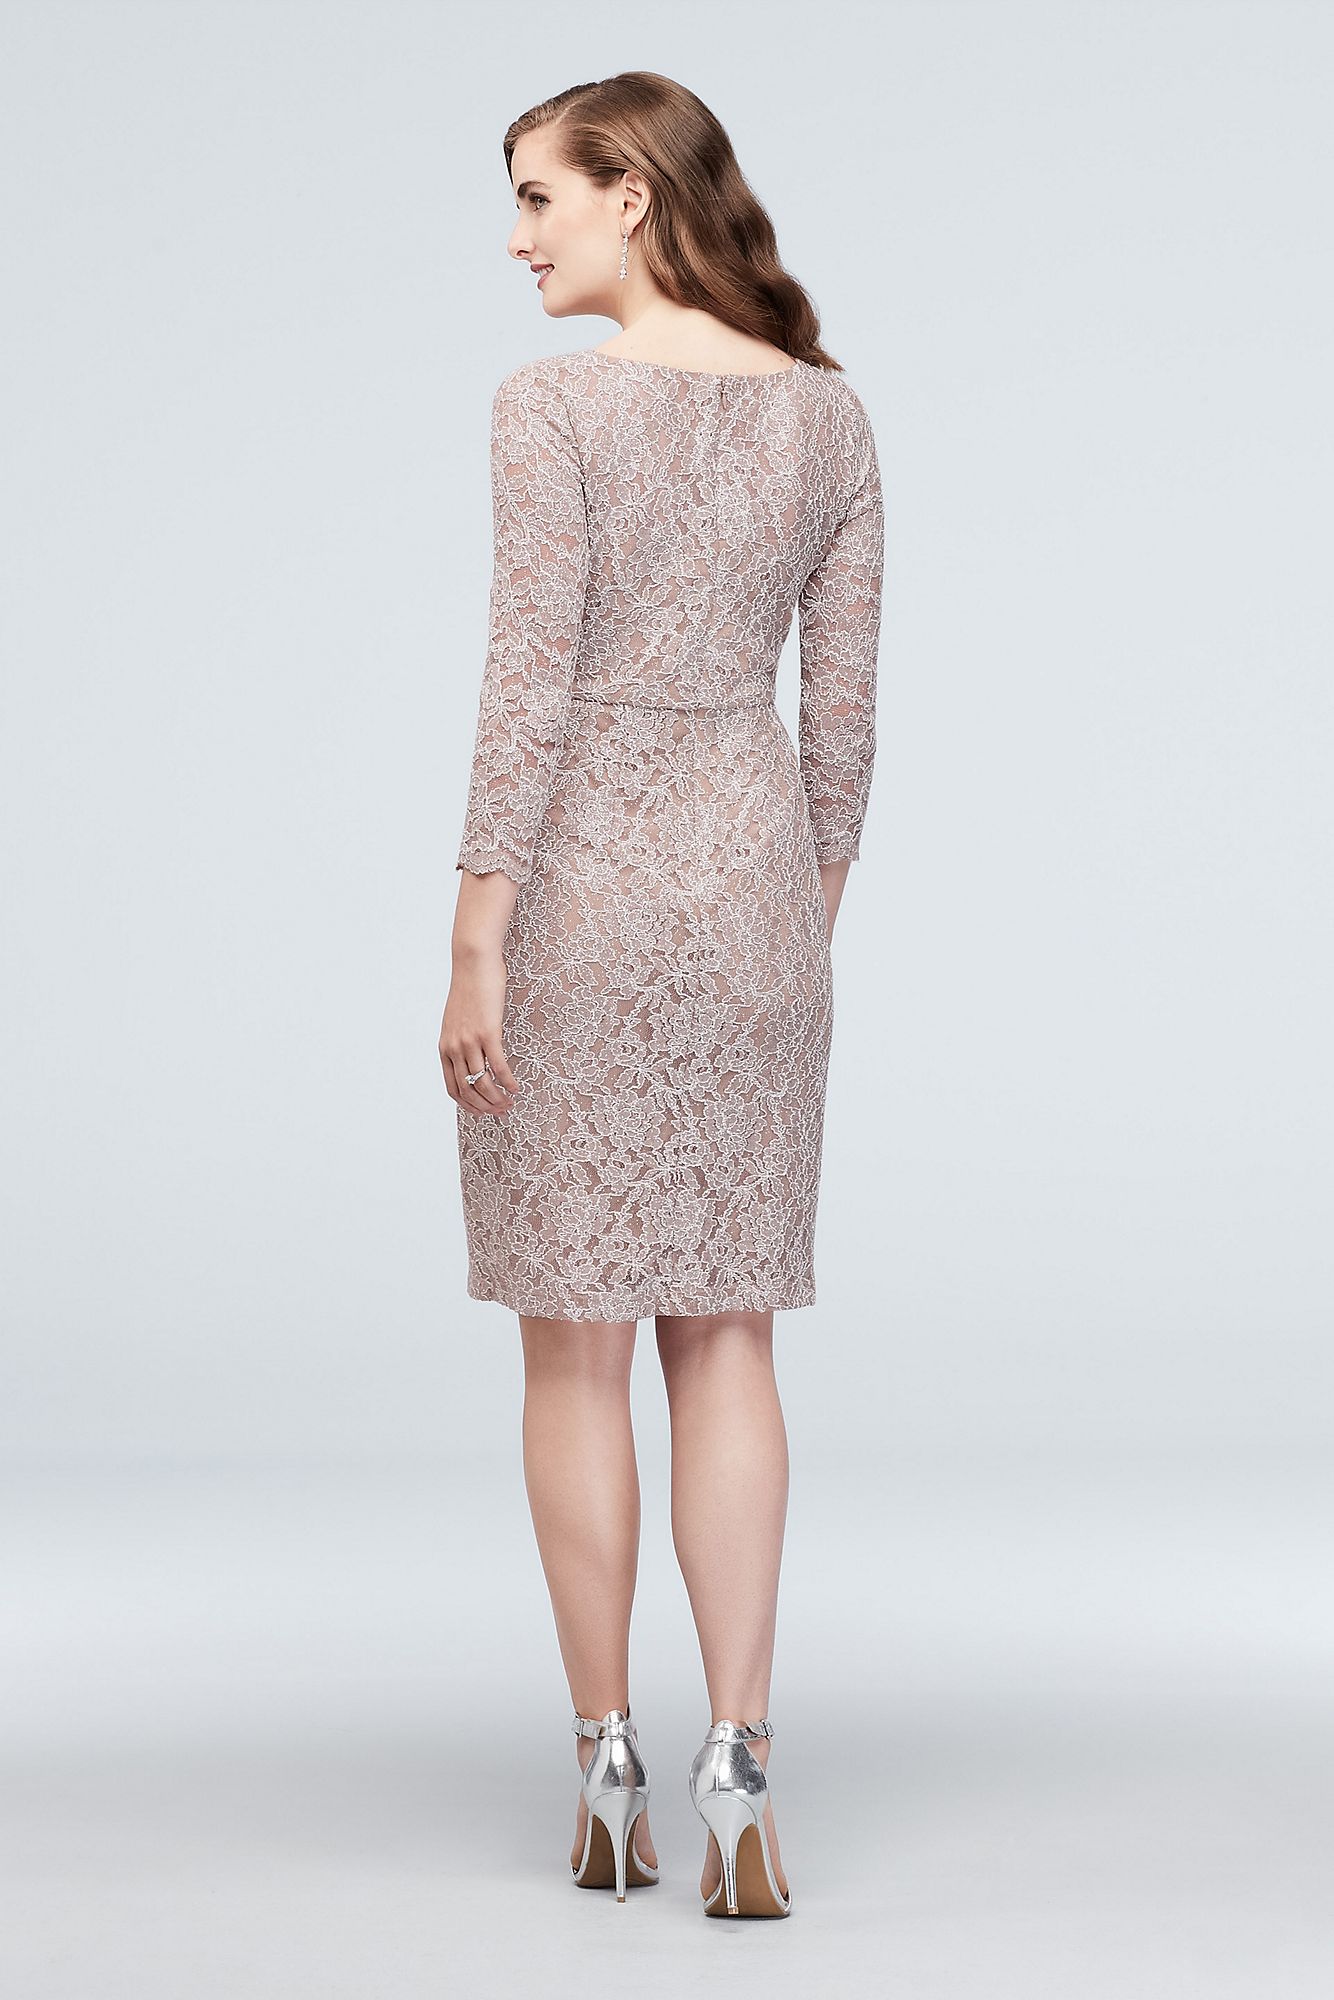 Glitter Lace 3/4-Sleeve Cocktail Dress with Belt 60427D